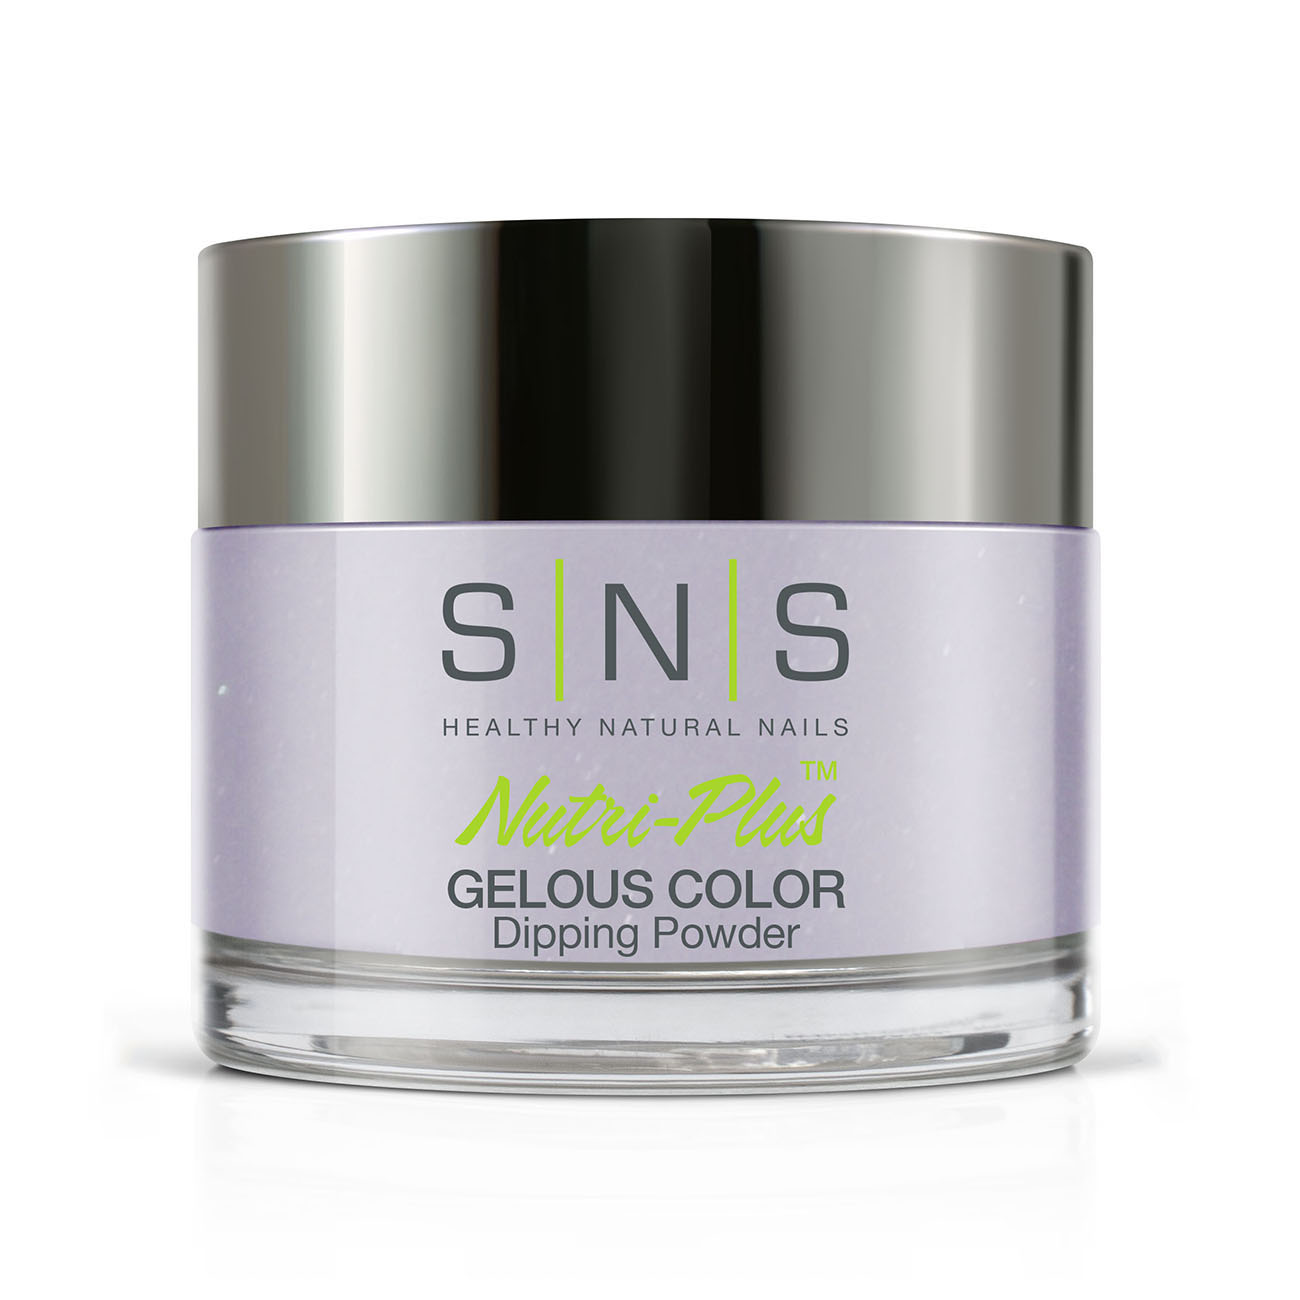 SNS Nails BOS20 Perfect Periwinkle 28g (1oz) | Gelous Dipping Powder